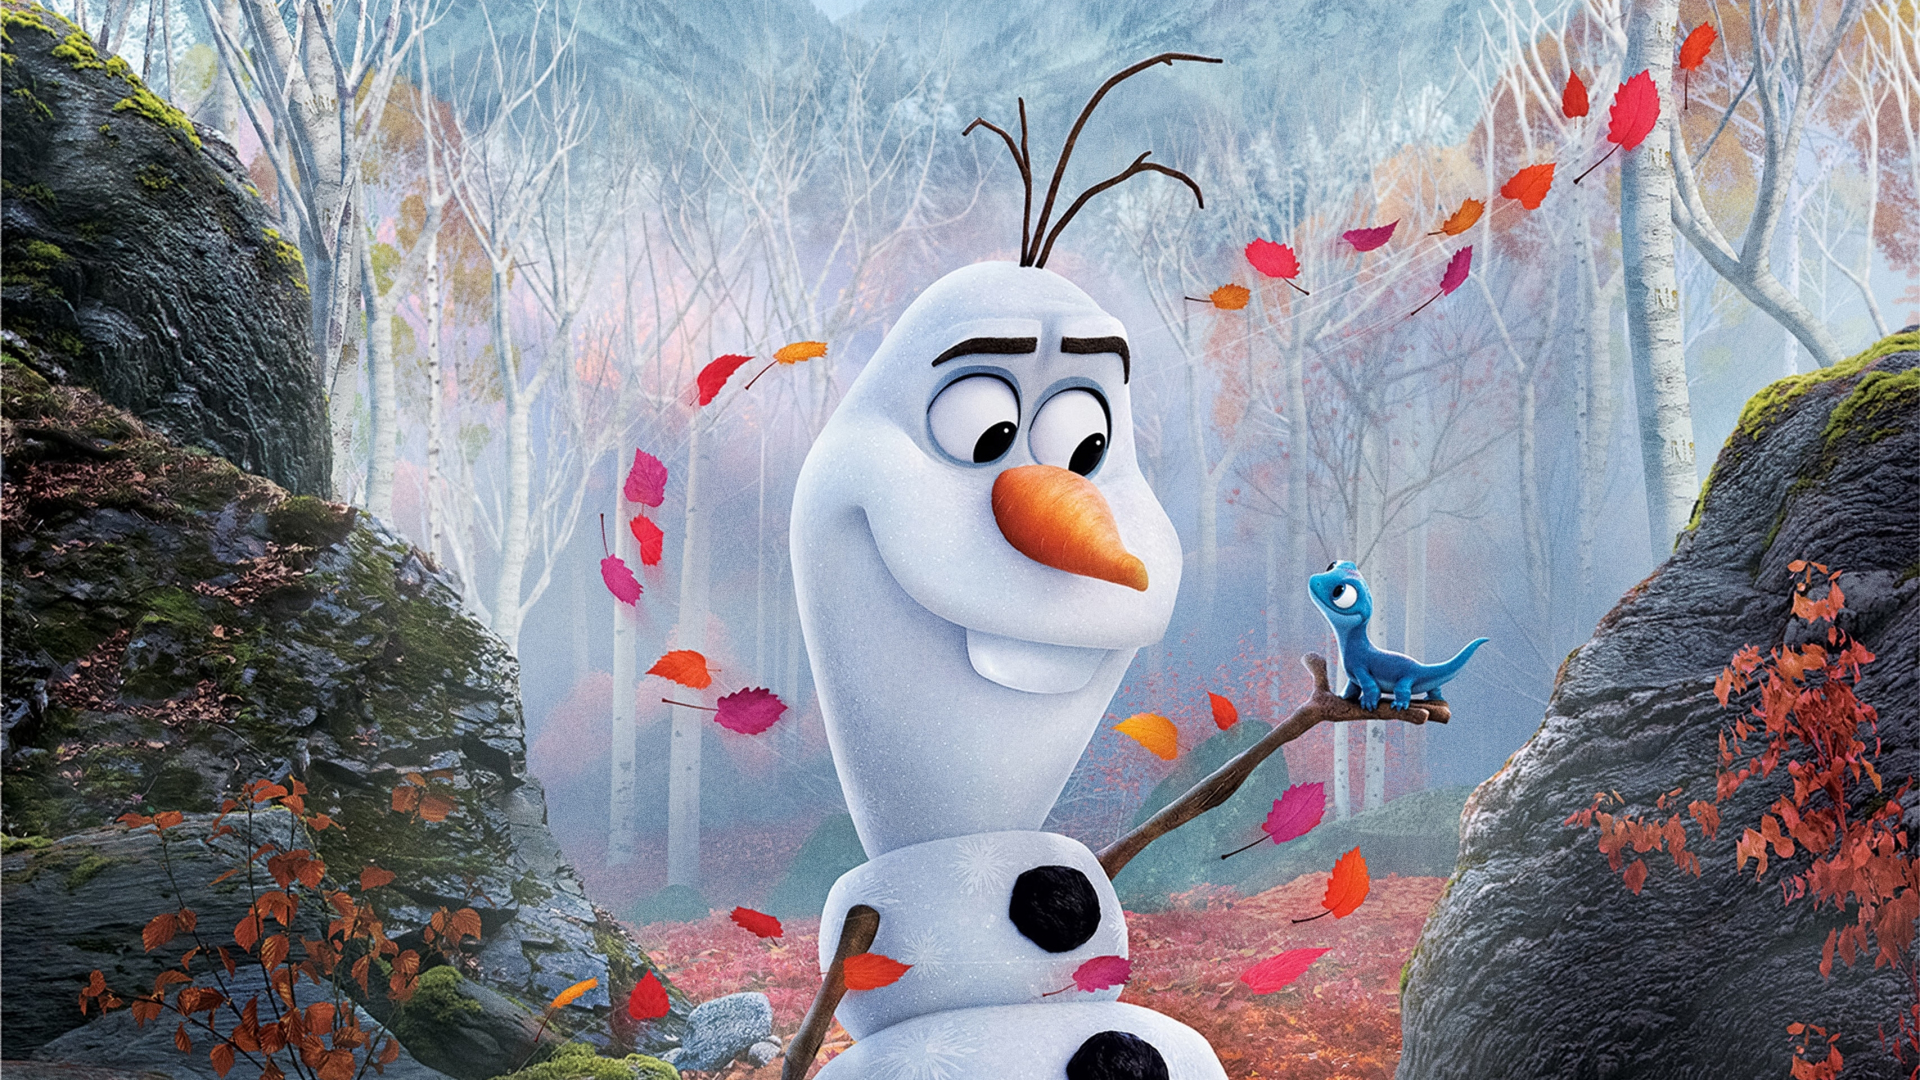 Download wallpaper 1920x1080 snowman, olaf from frozen 2, movie, full hd,  hdtv, fhd, 1080p wallpaper, 1920x1080 hd background, 23408